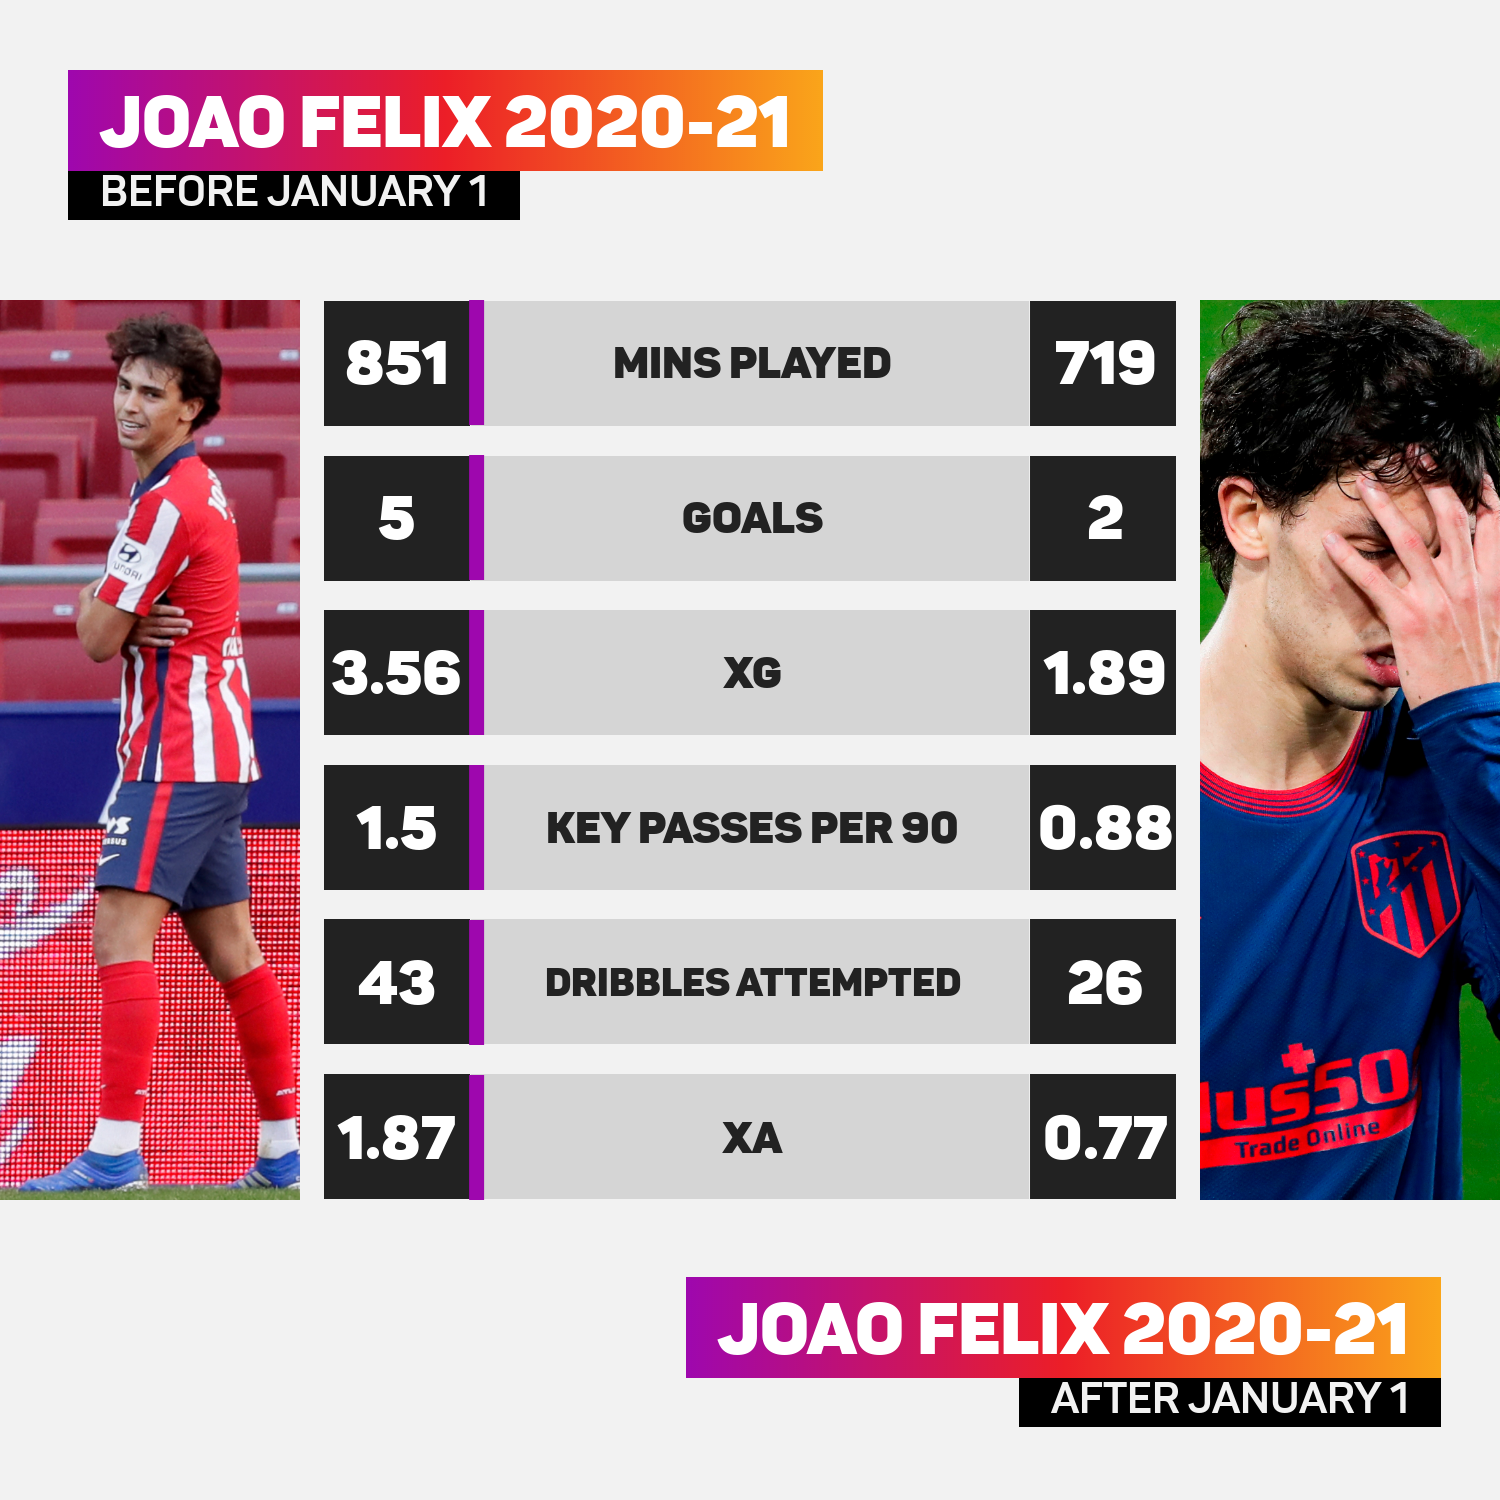 Joao Felix struggled in 2020-21 after a positive start to the season